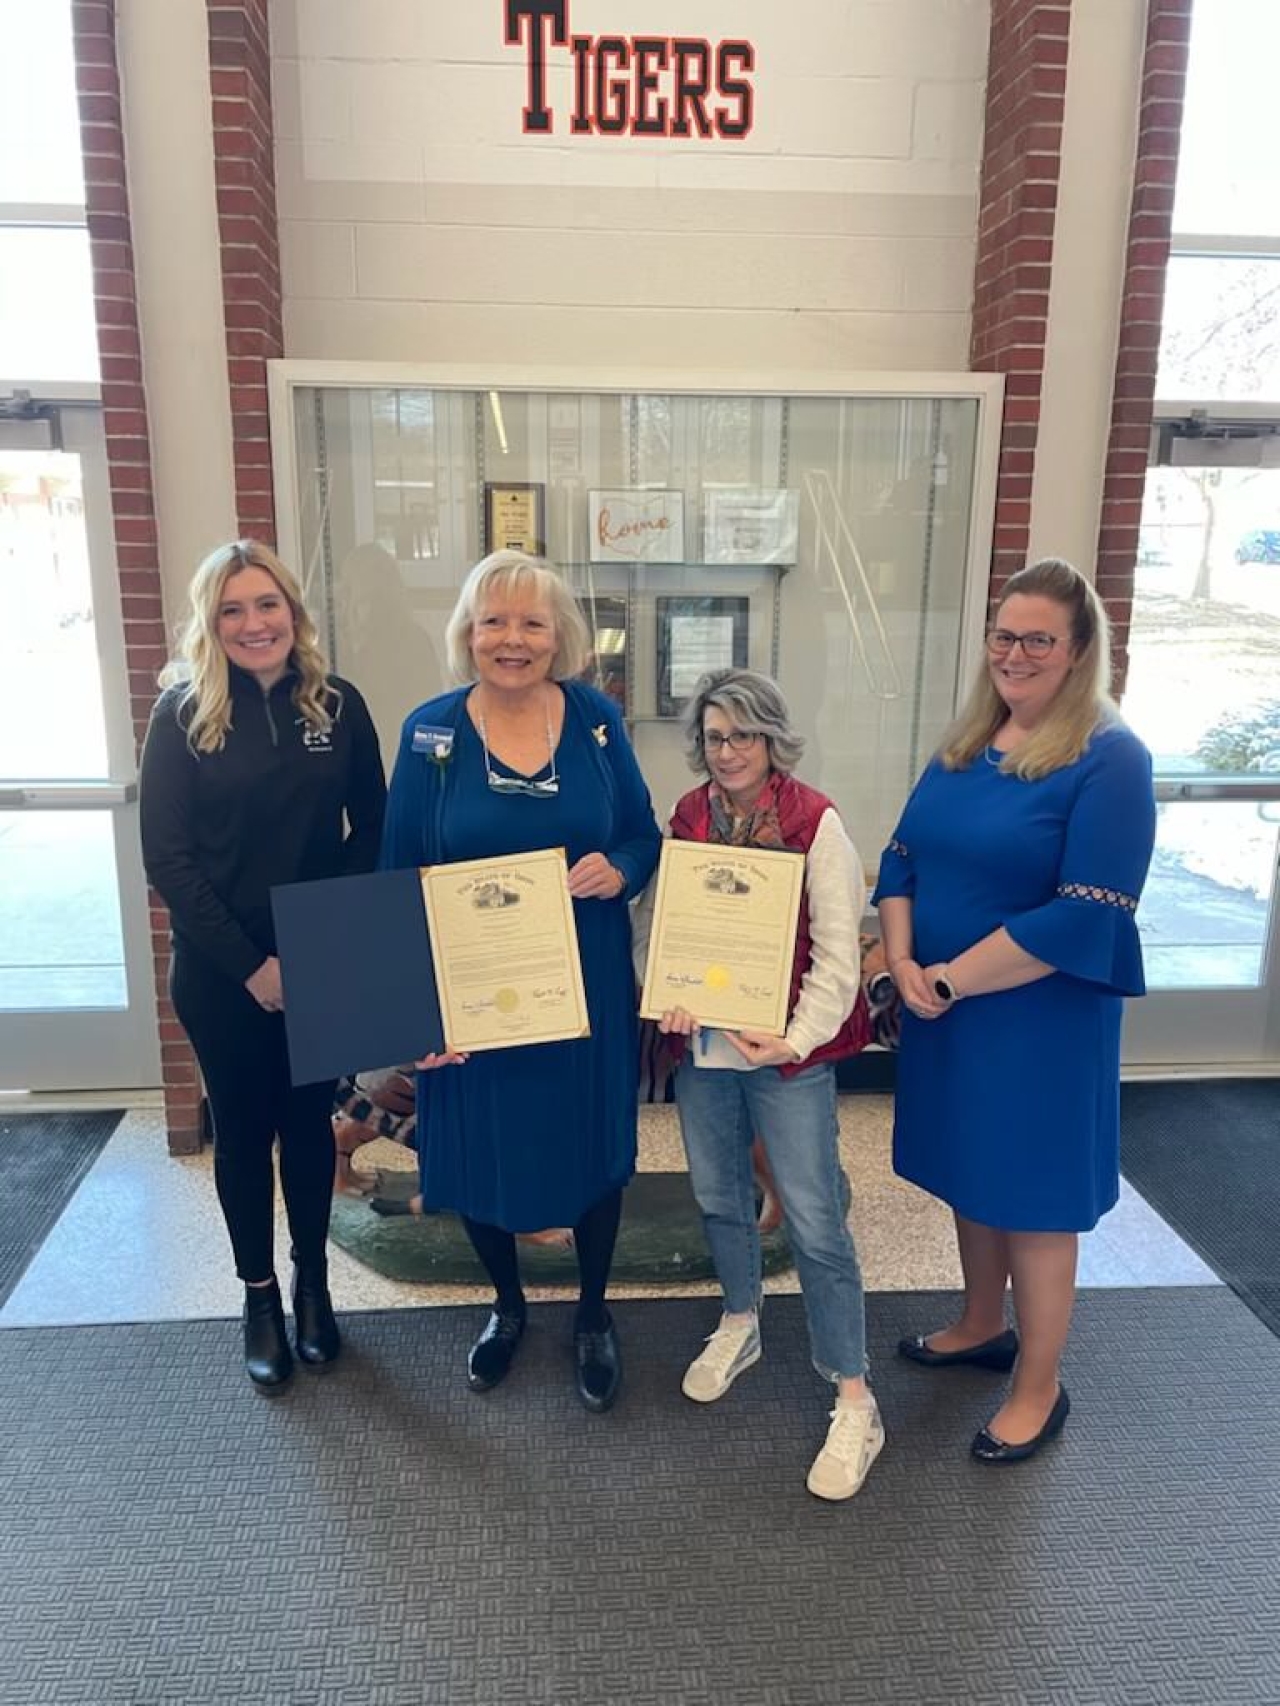 It was my privilege and honor to recognize Lisa Salyers and Monica Asher for their monumental impact on Chagrin Falls School District.    Lisa, a science teacher with exceptional commitment and pro